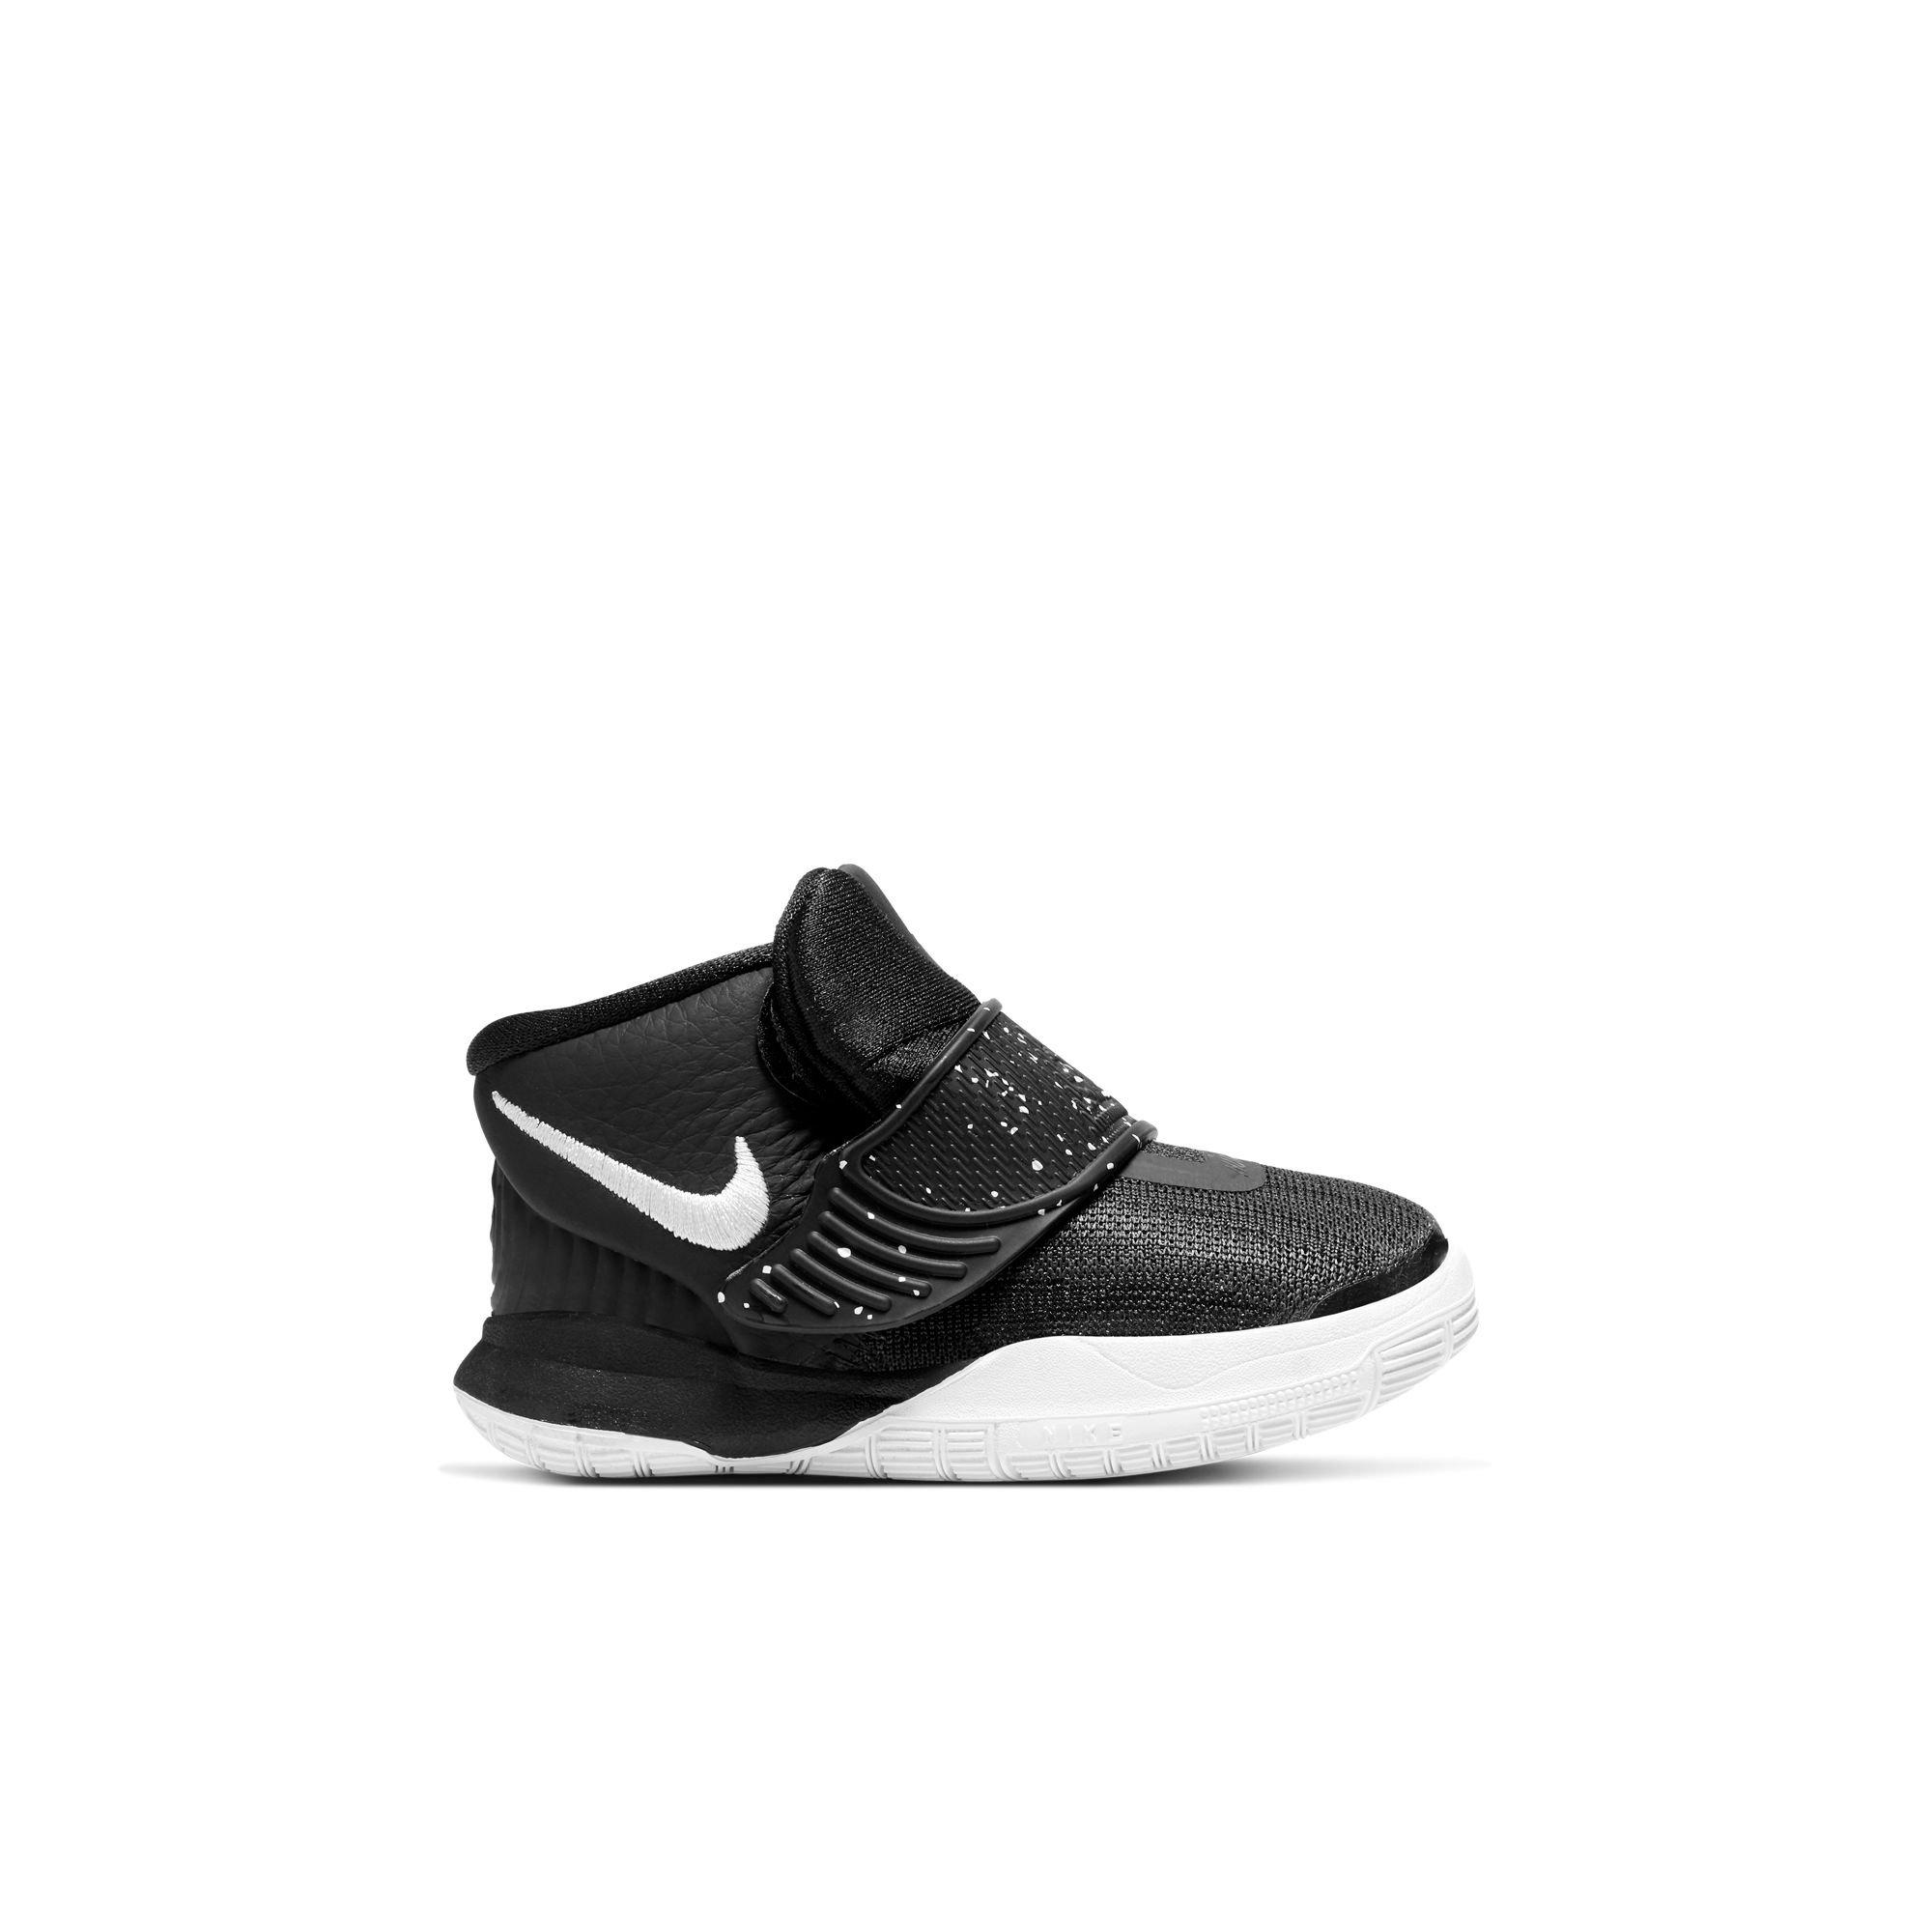 kyrie irving youth sneakers